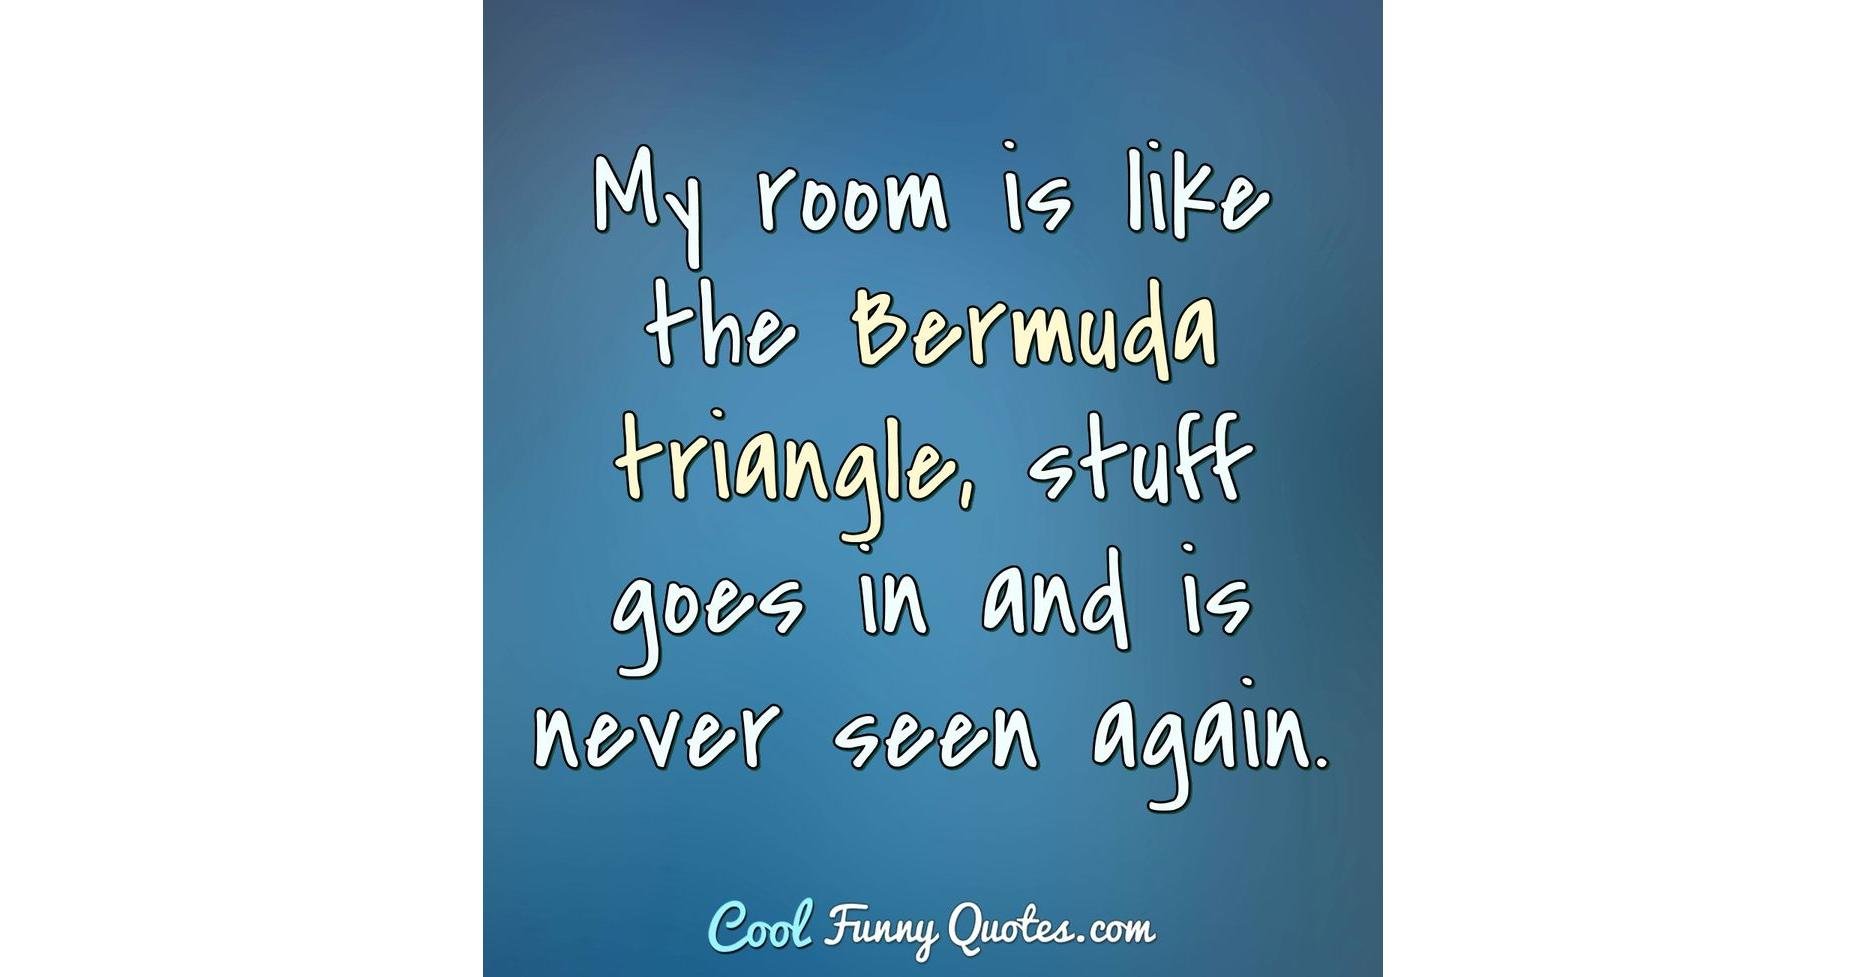 My room is like the Bermuda triangle, stuff goes in and is never seen